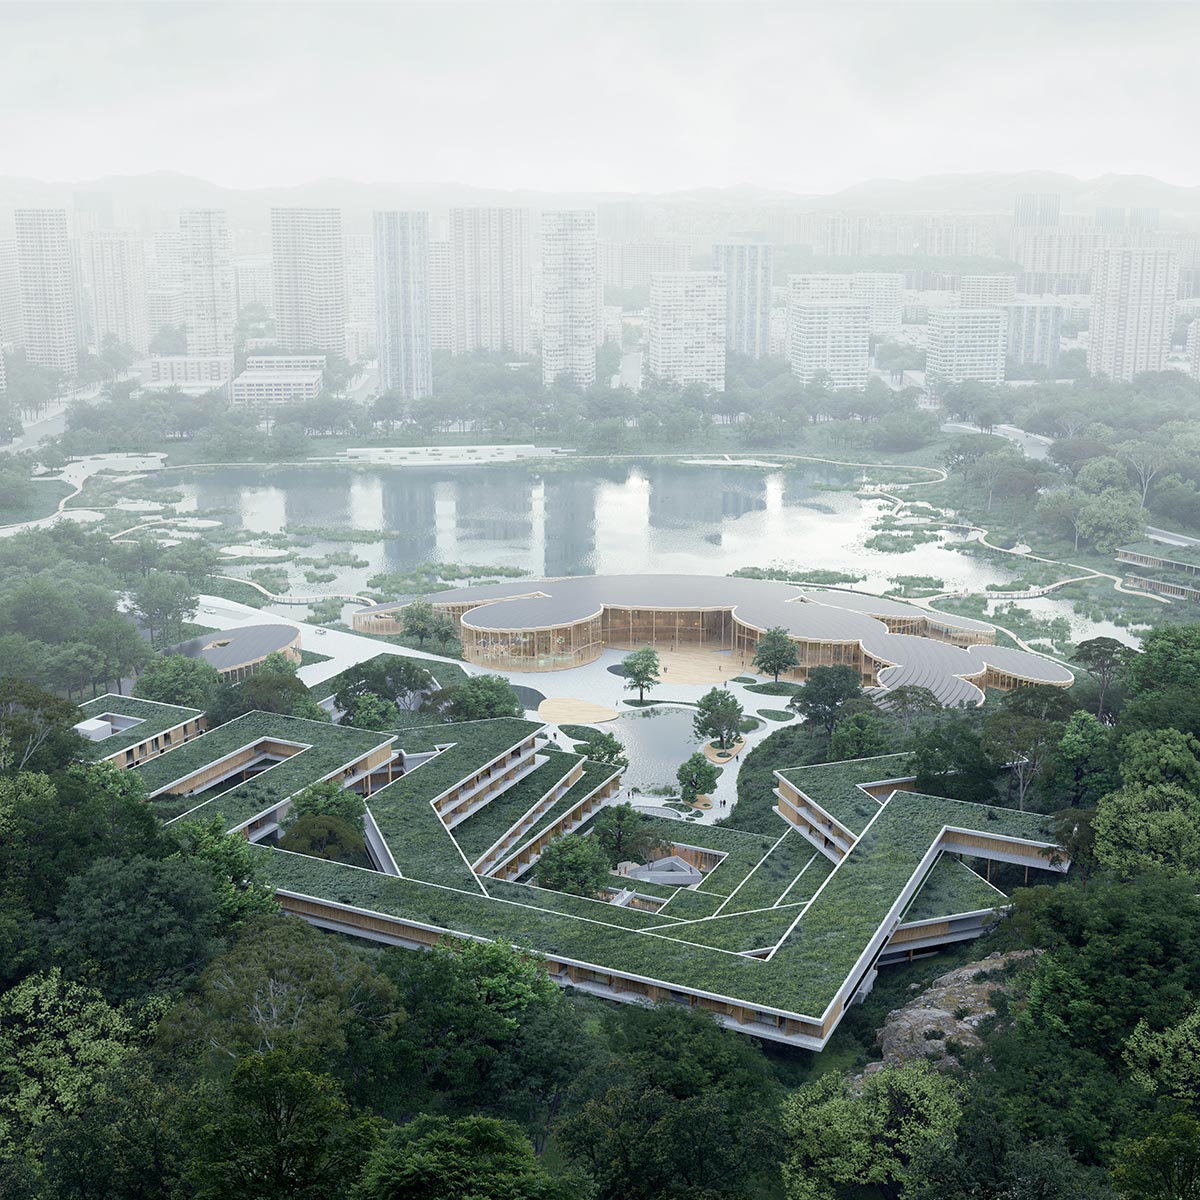 Mecanoo, Meng and Lola Landscape win competition to design Shenzhen Guangming Scientist Valley